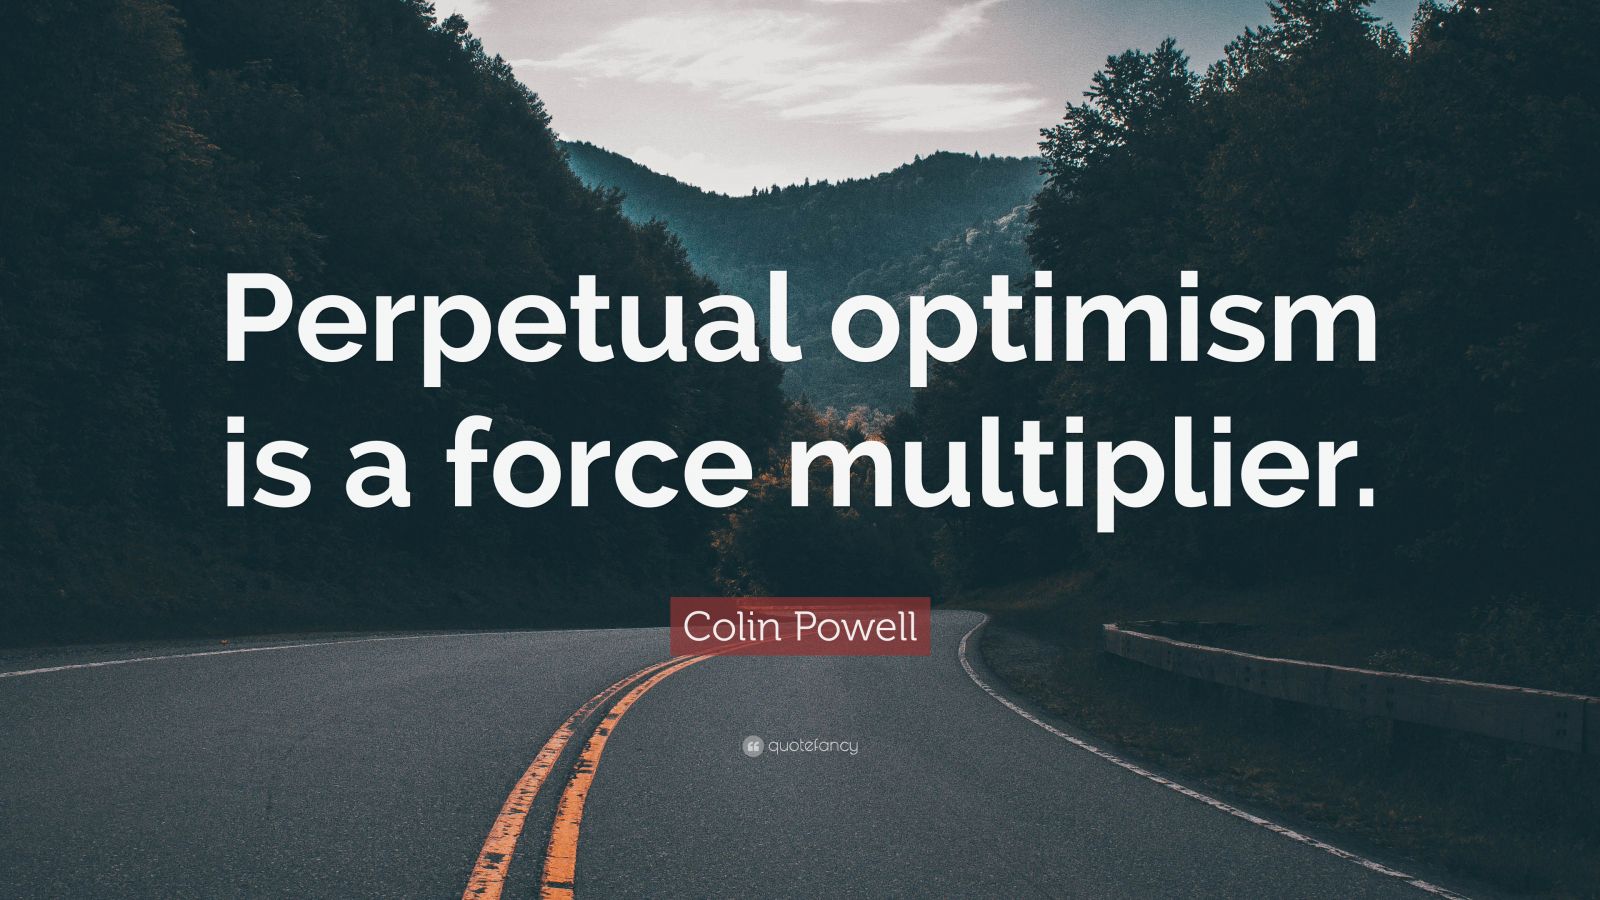 perpetual optimism meaning in hindi